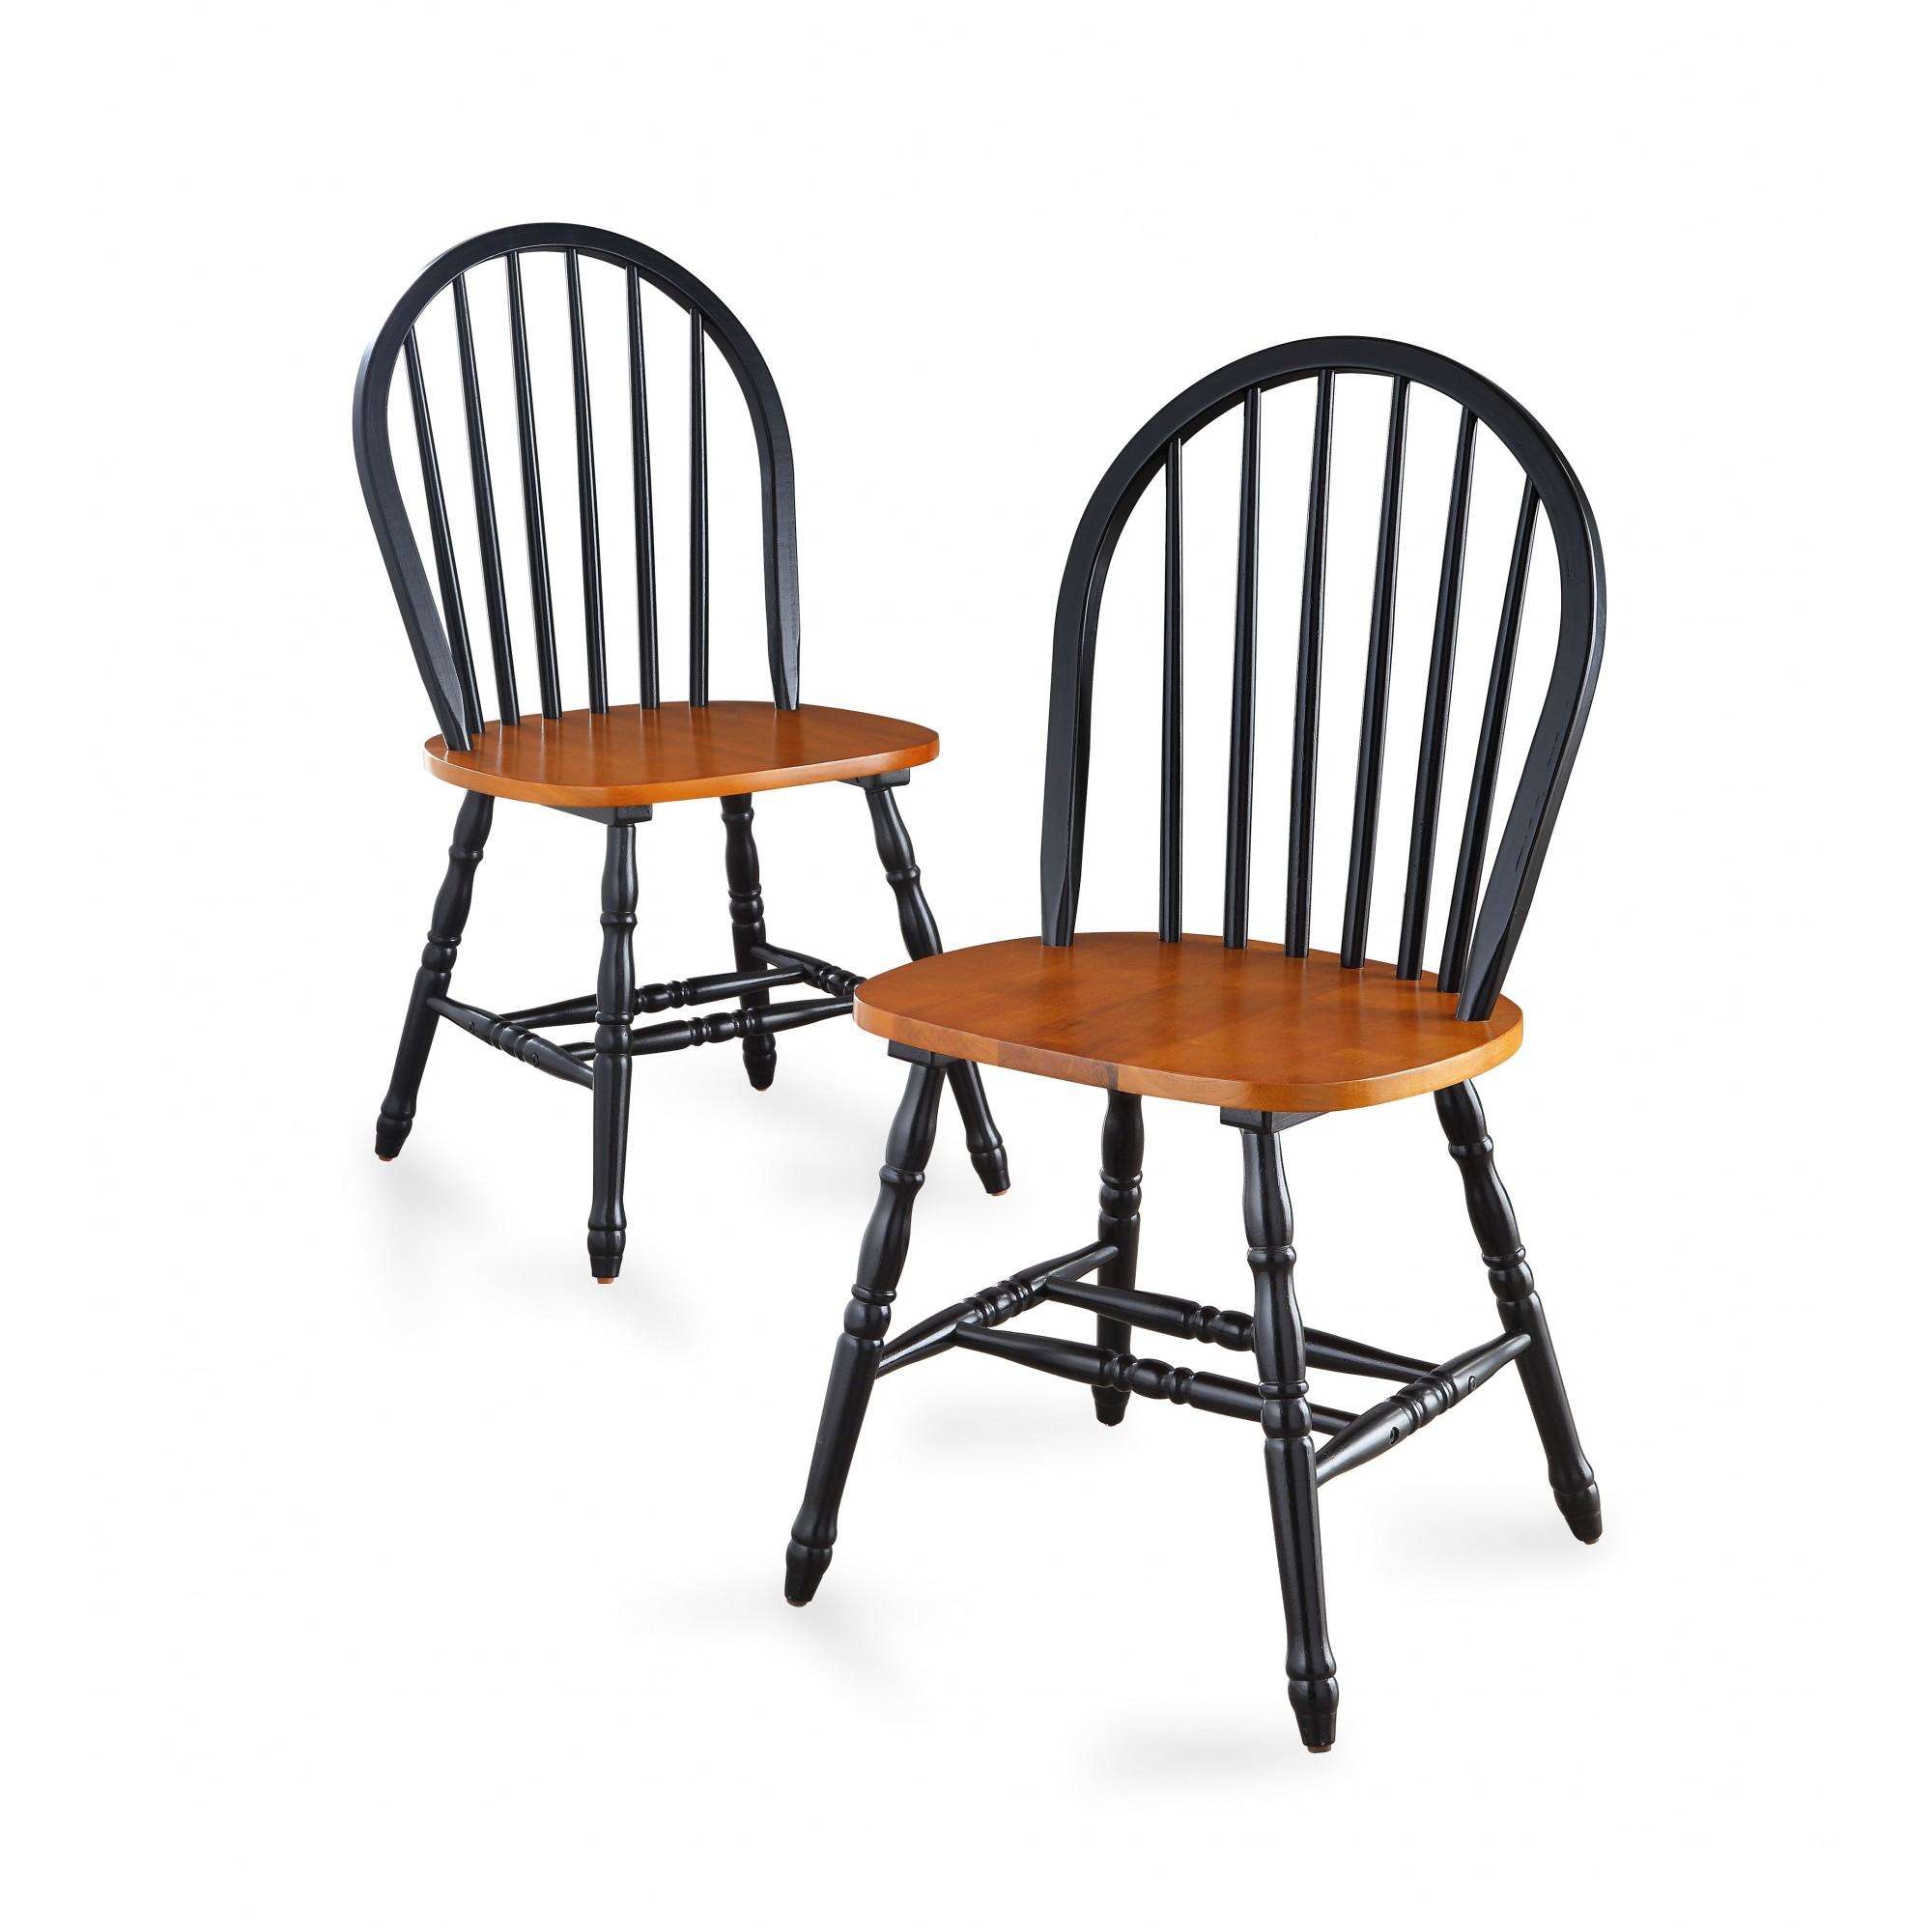 Better Homes and Gardens Autumn Lane Windsor Solid Wood Chairs, Set of 2, Black and Oak - image 5 of 8